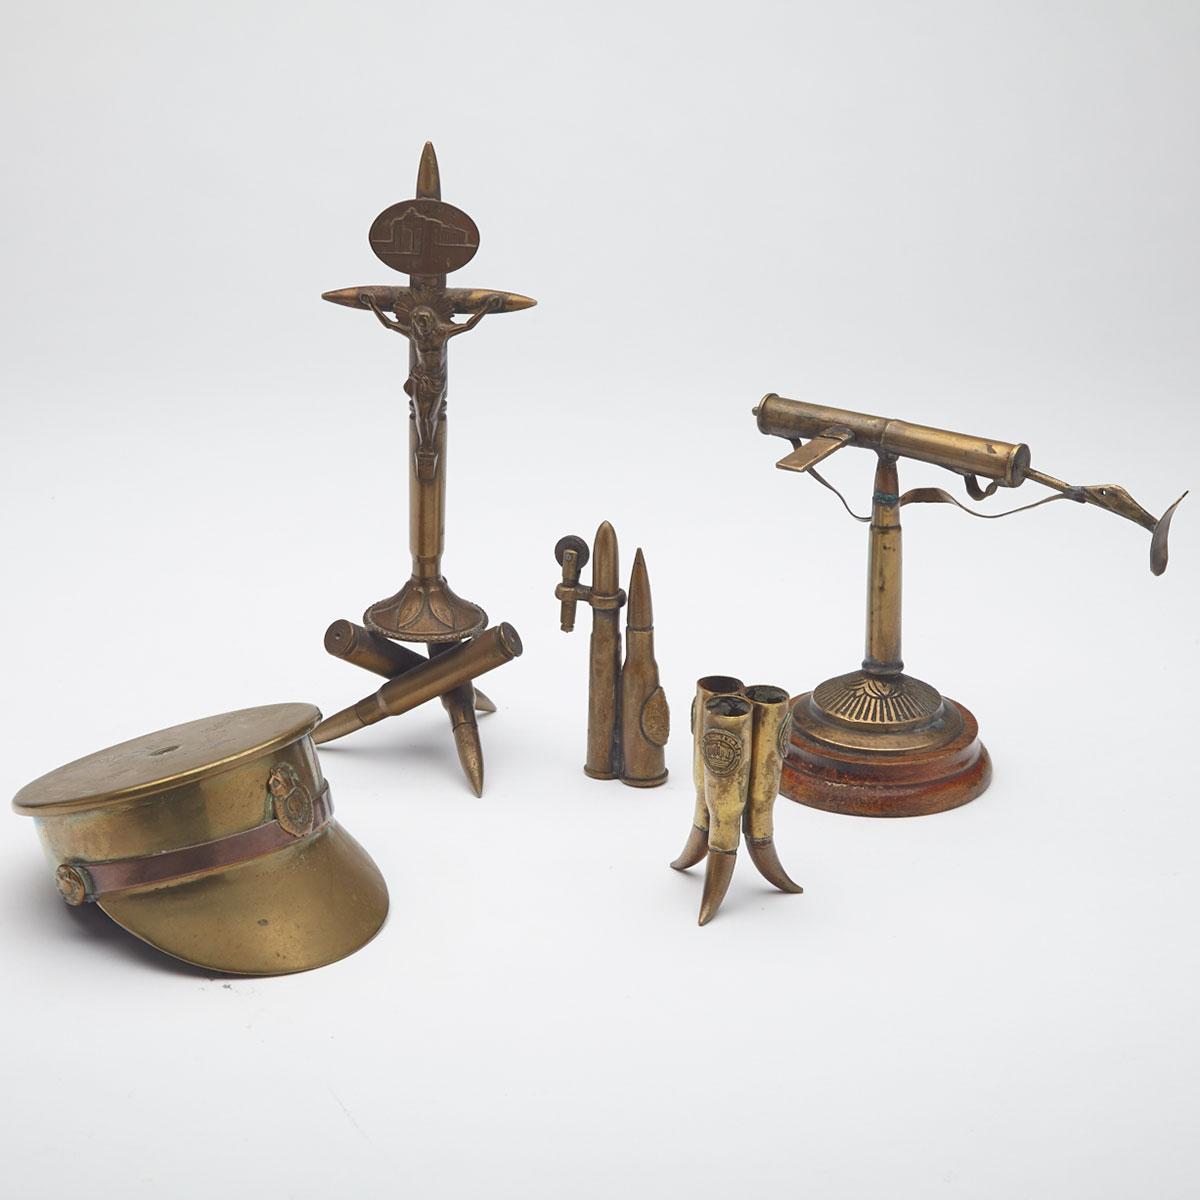 Group of Five WWI ‘Trench Art’ Items, early 20th century